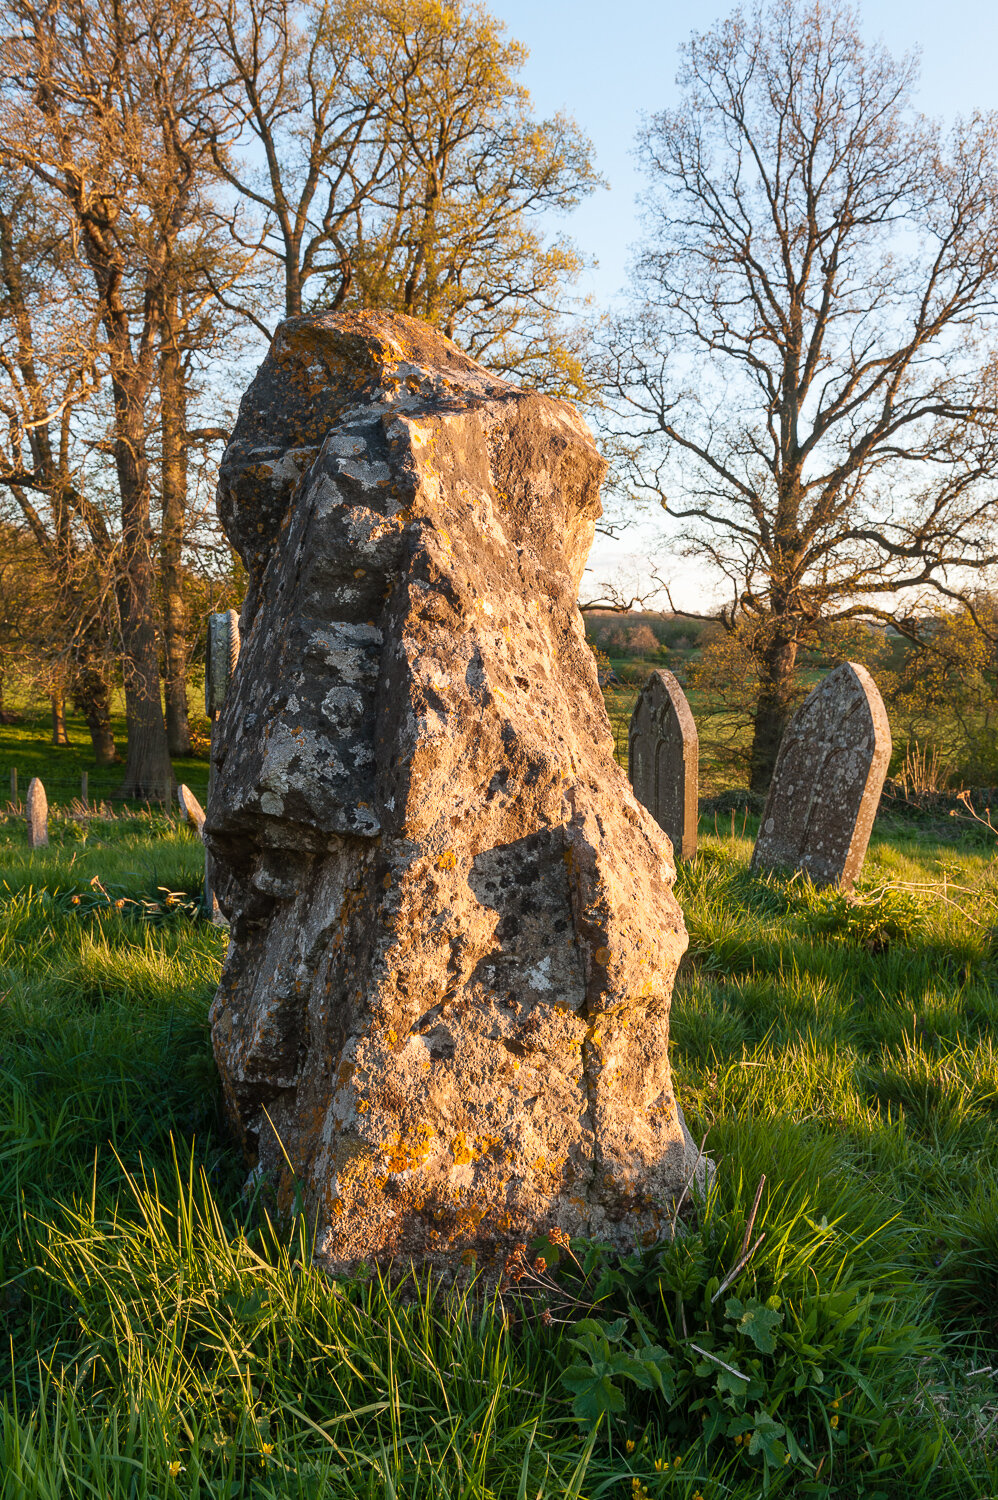 The menhir, now a gravestone, in St Stephen’s churchyard in Old Radnor